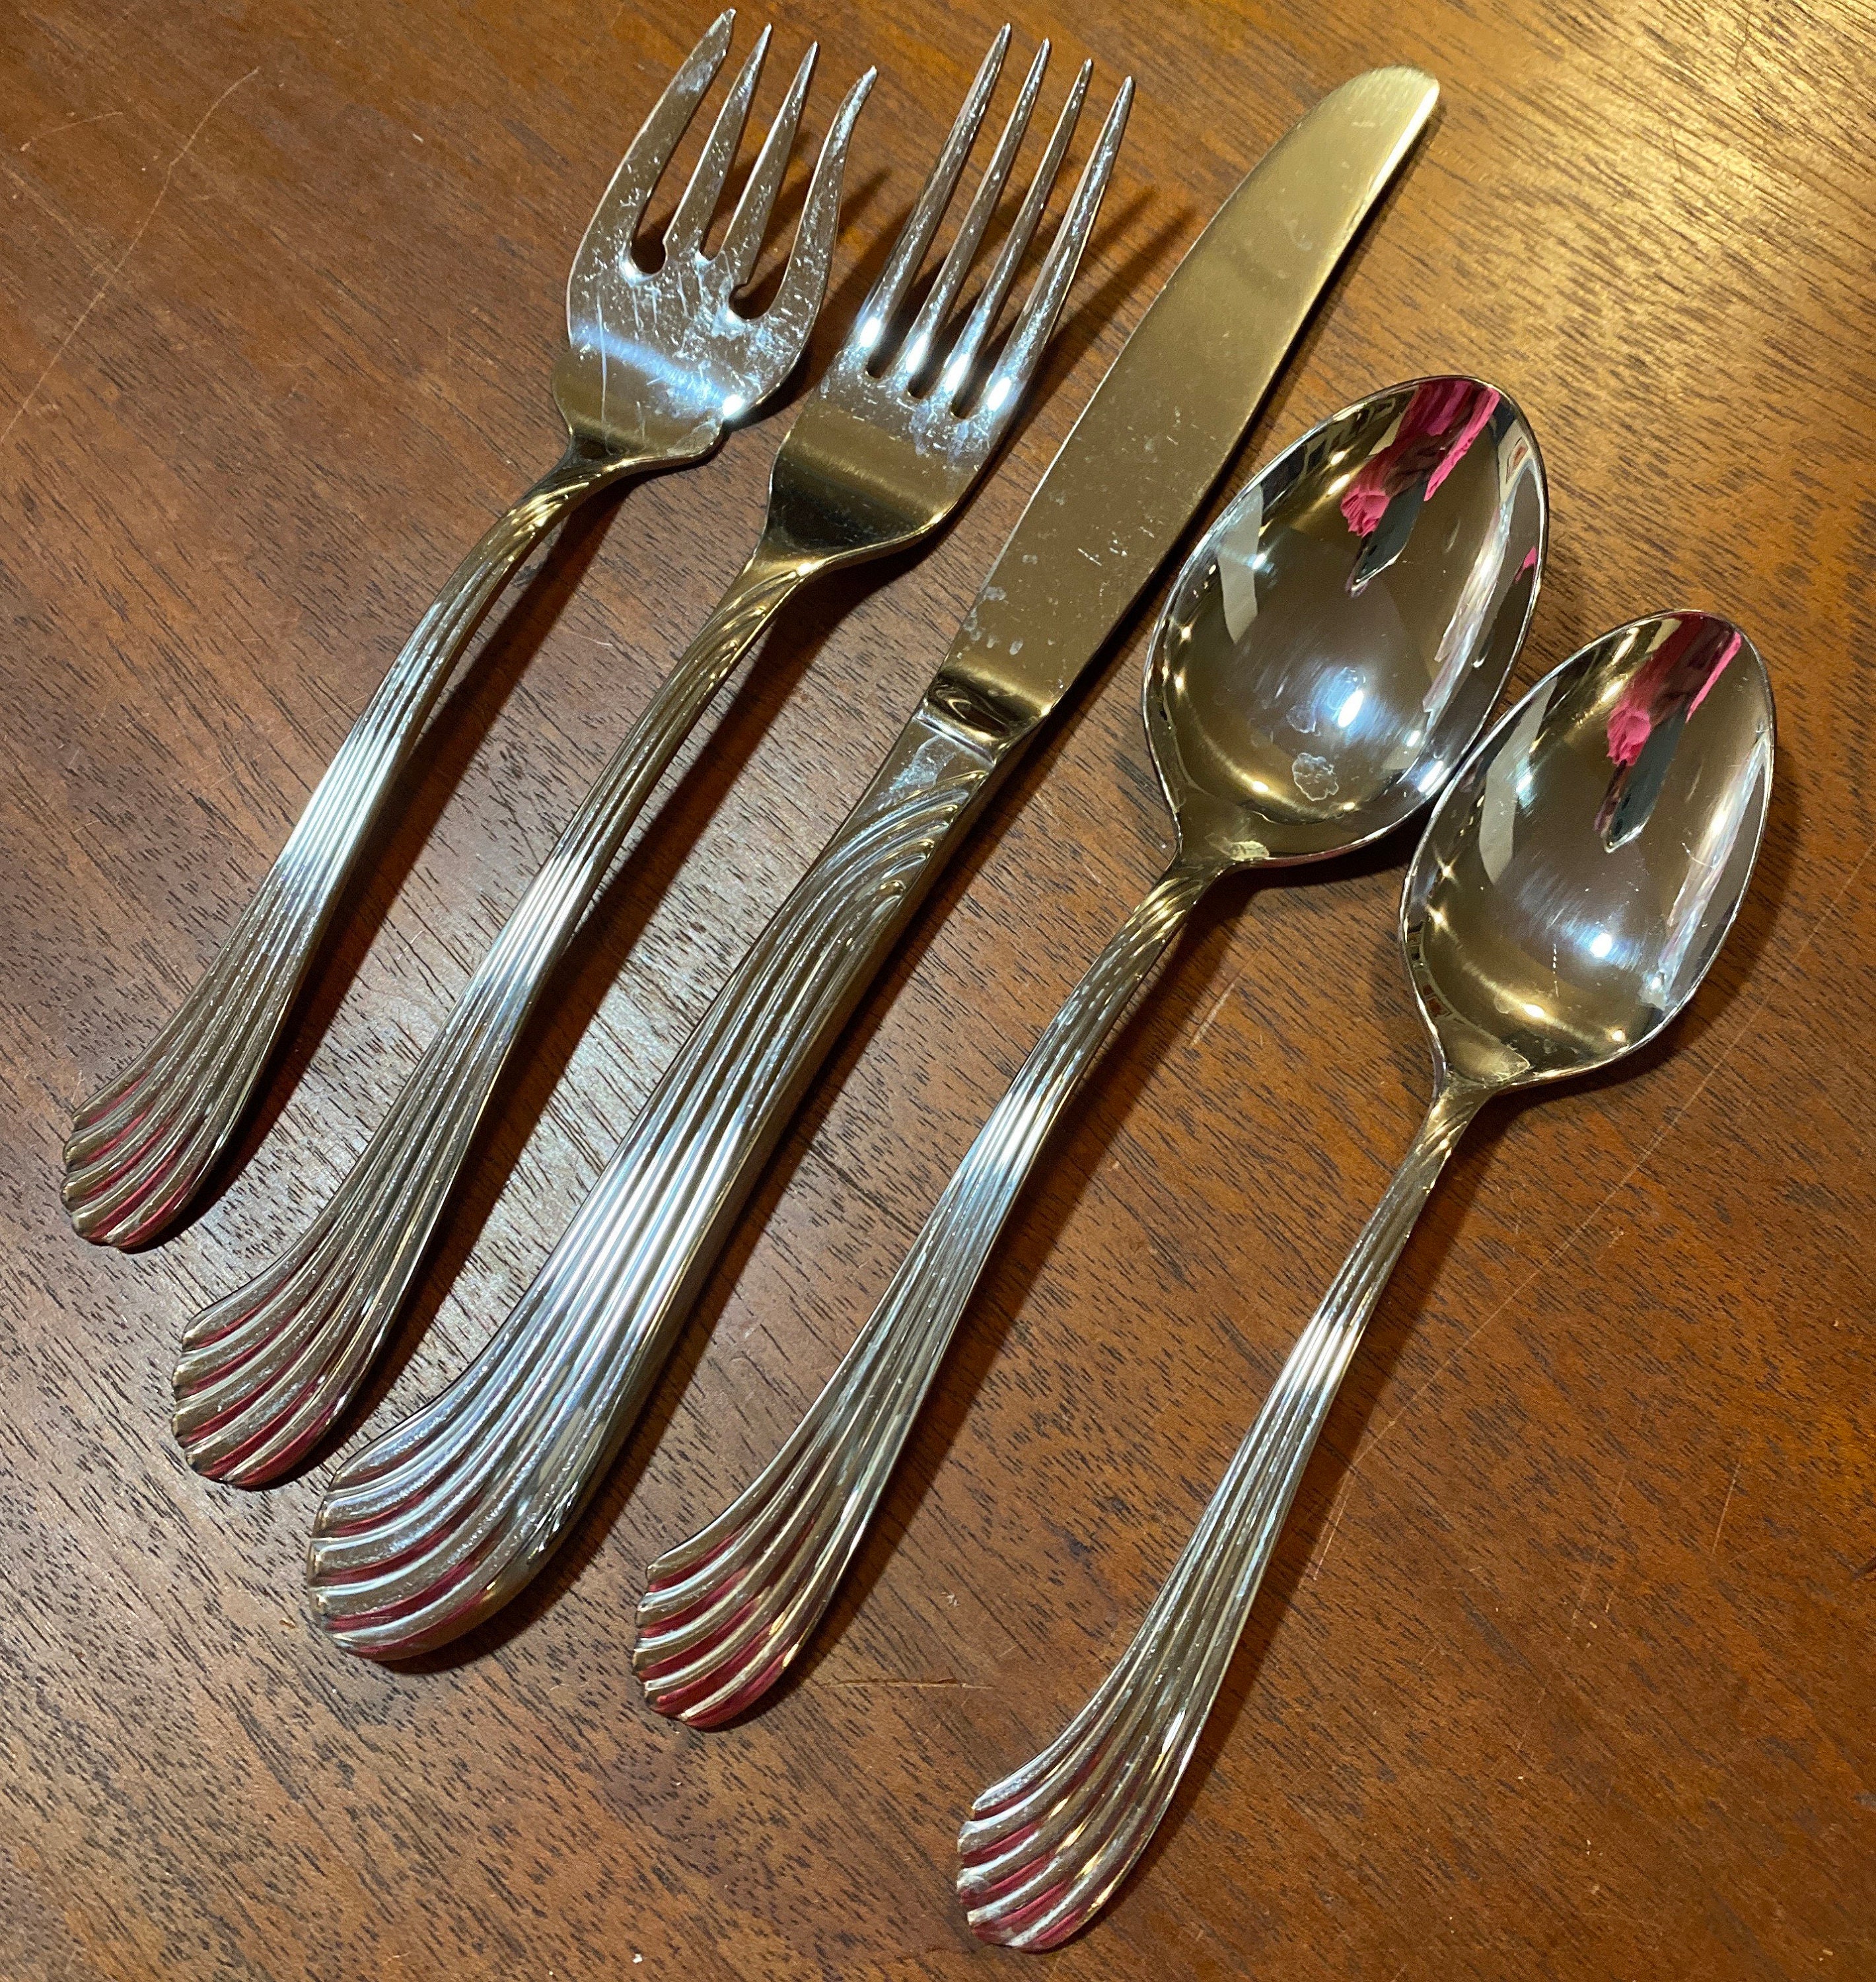 Reed & Barton SELECT ROSE QUEEN Stainless Silverware Flatware ***YOUR CHOICE***